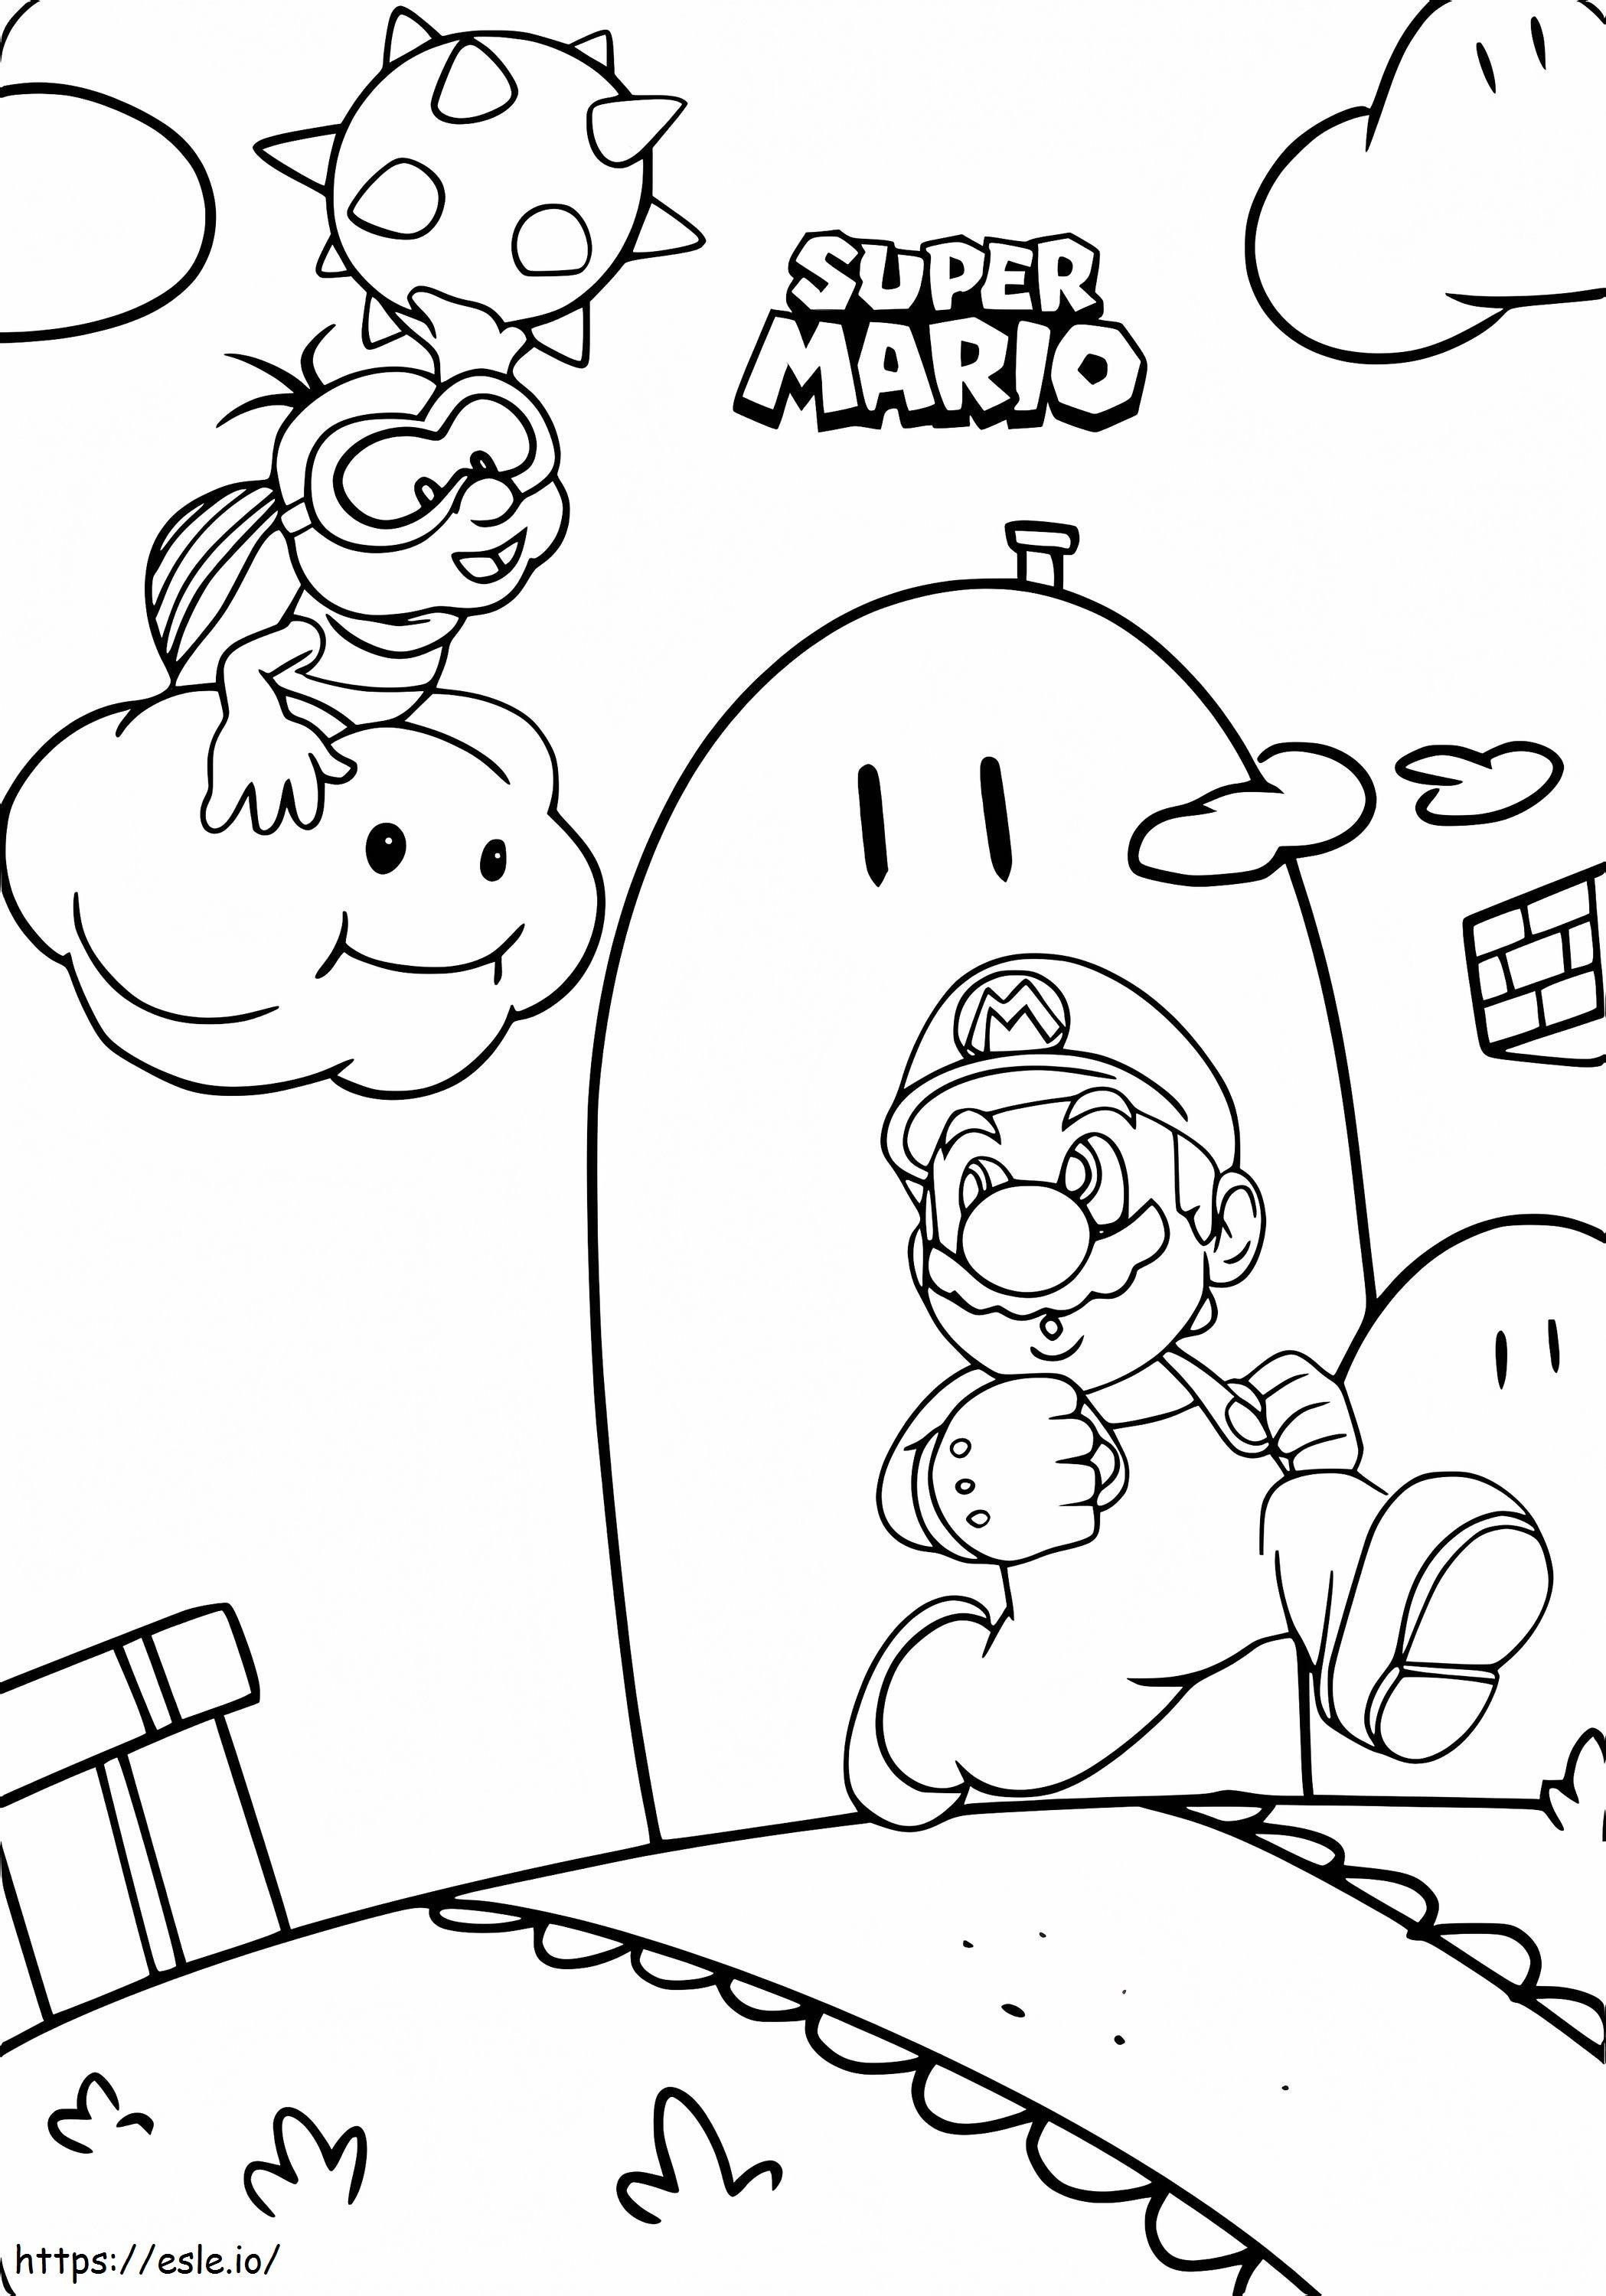 Super Mario In Action In The Game 716X1024 coloring page